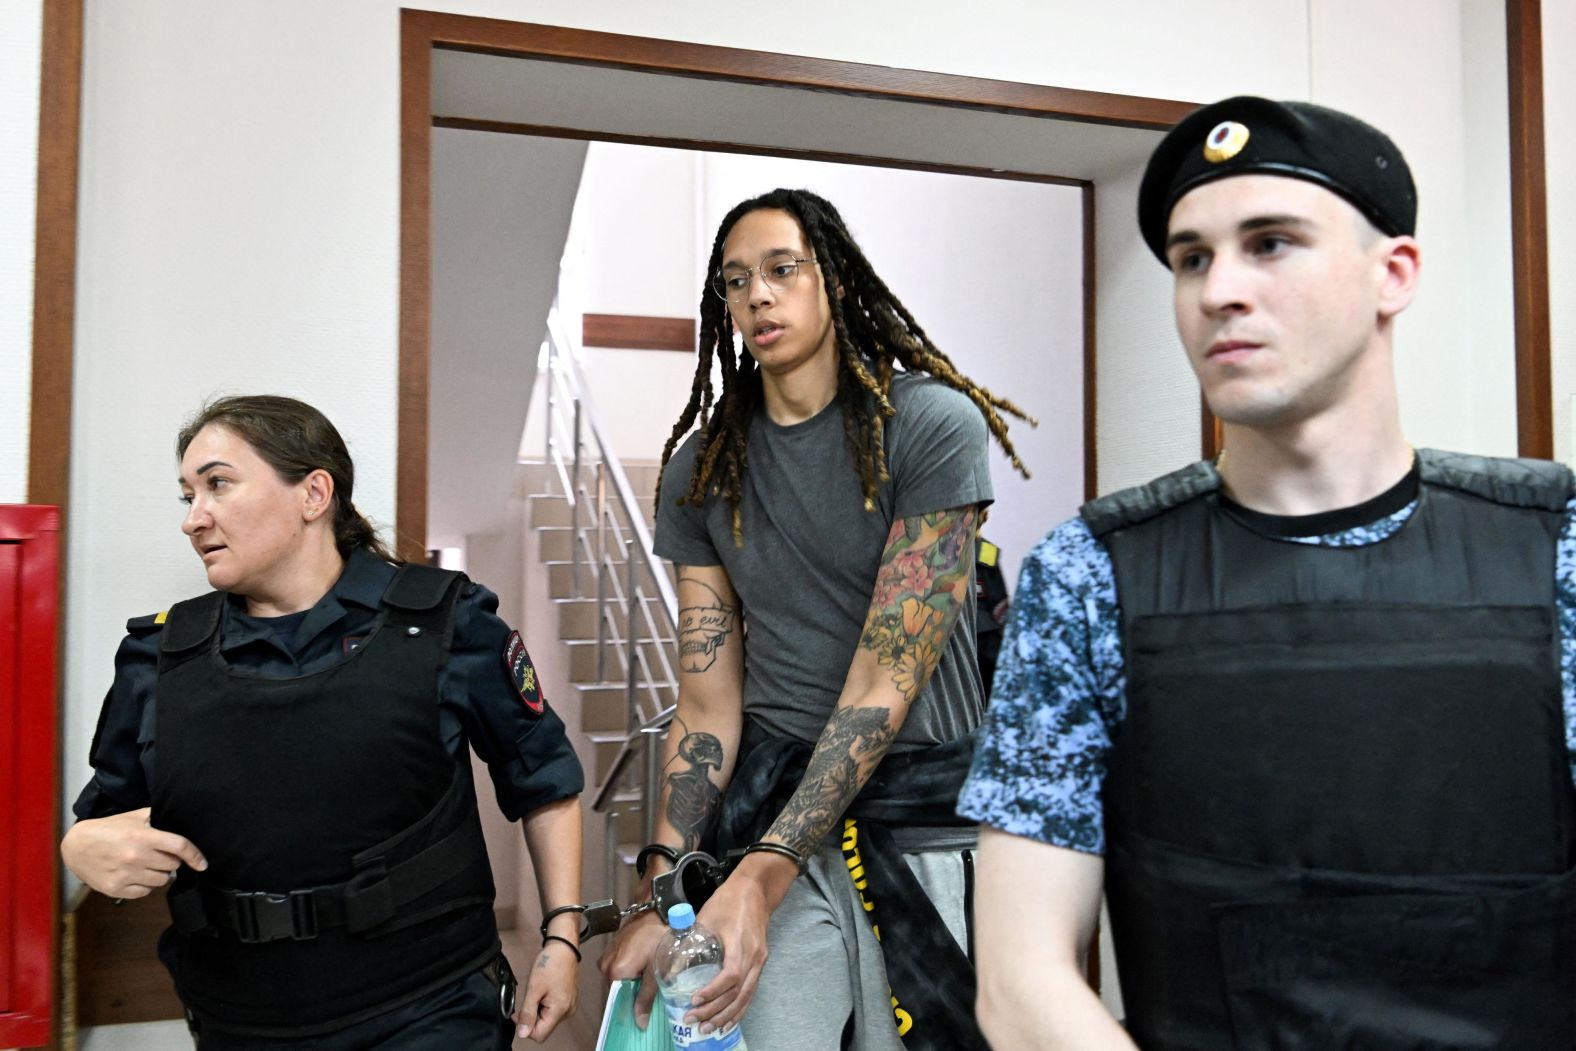 Griner arrives to a hearing at the Khimki Court outside Moscow in June 2022. Her case raised concerns she was being used as a political pawn in Russia's war against Ukraine. The US State Department classified her as wrongfully detained.